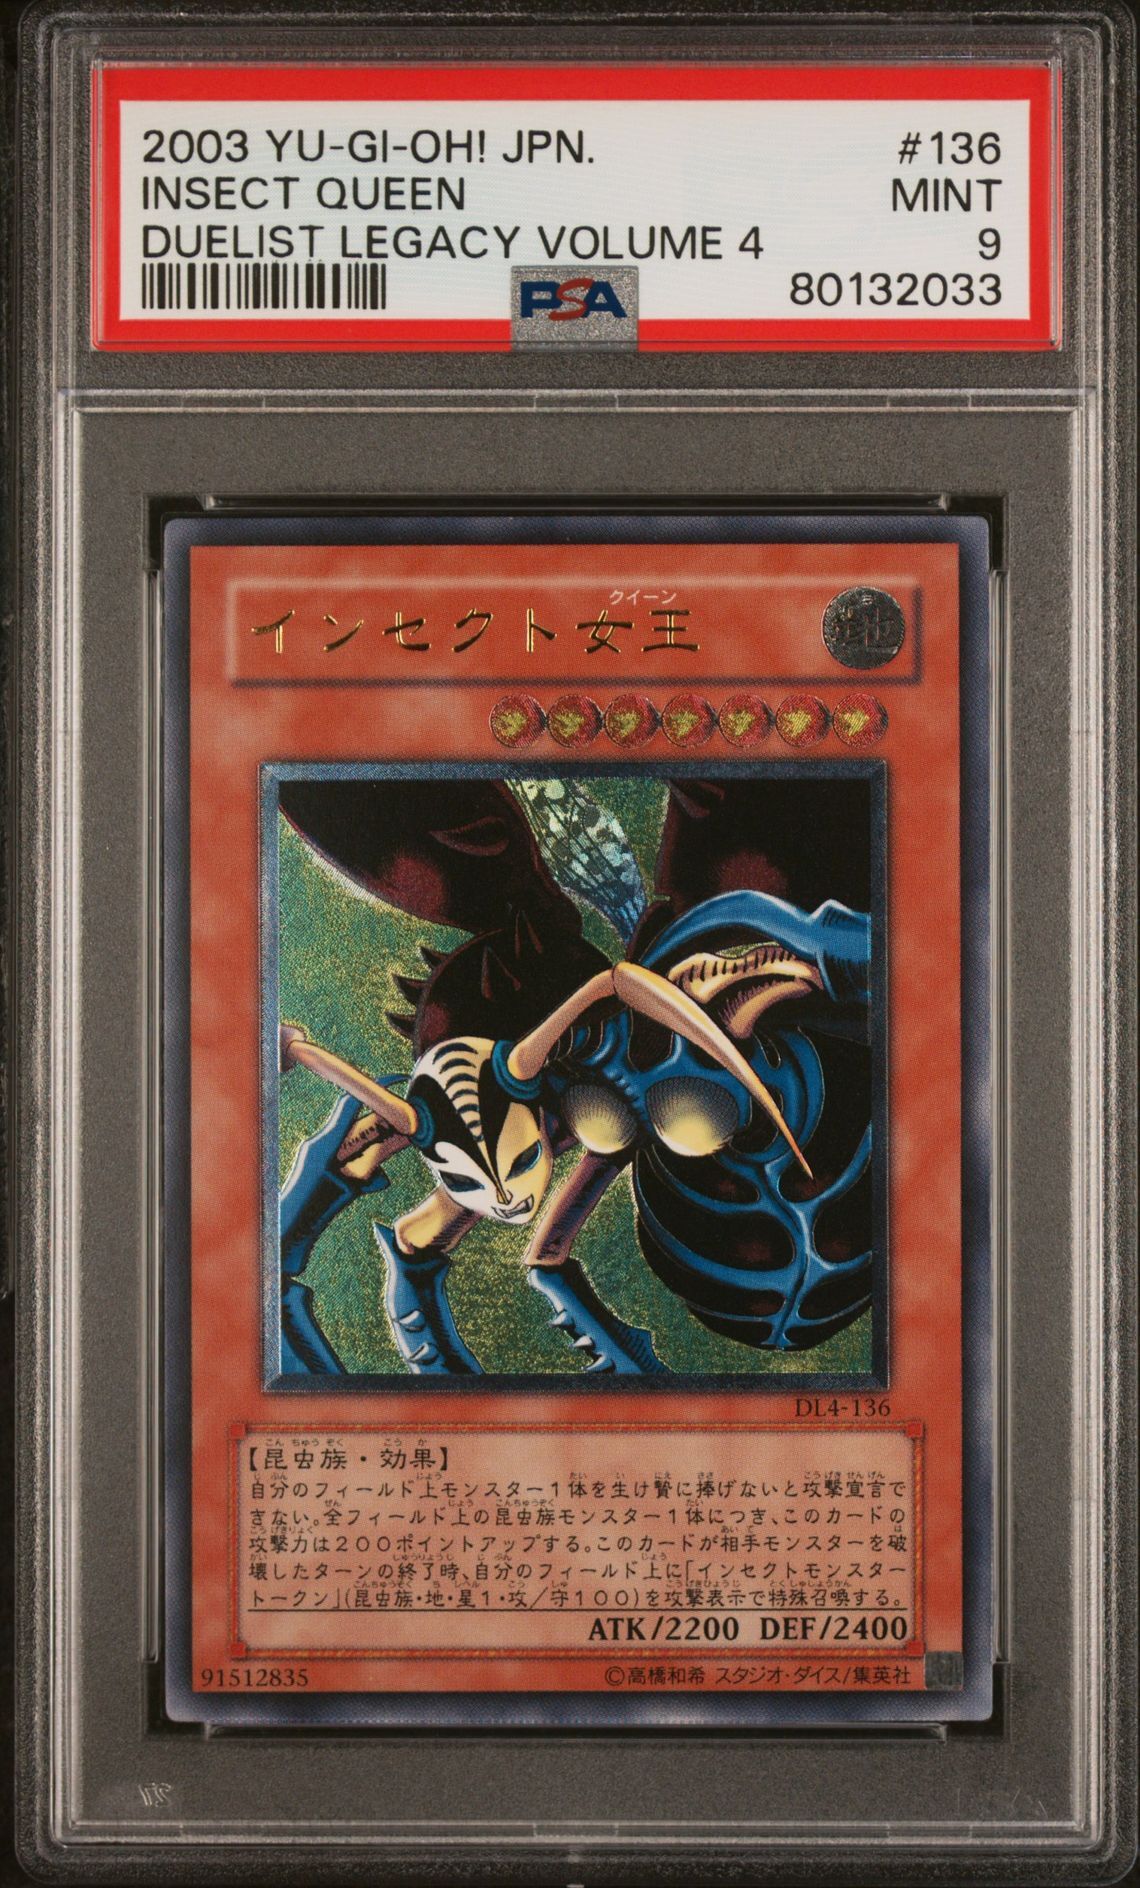 2003 YU-GI-OH! JAPANESE DUELIST LEGACY VOLUME 4 136 INSECT QUEEN - PSA 9 MINT